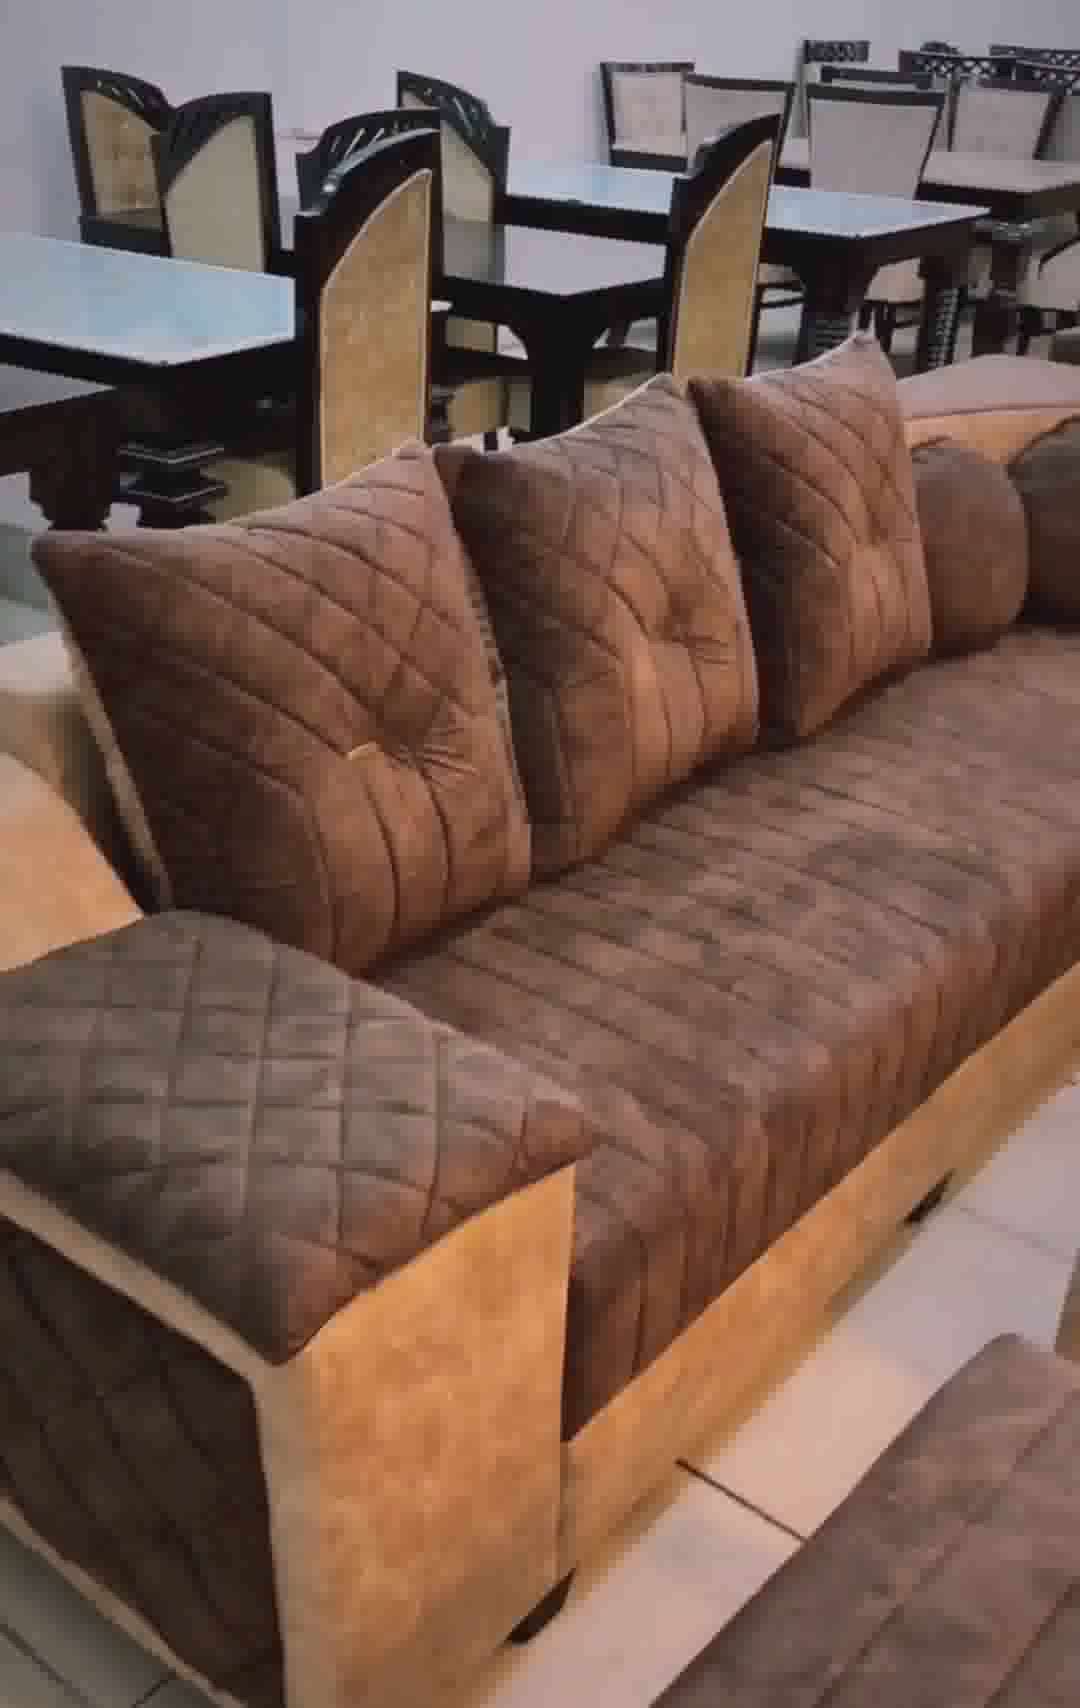 Sofa set 😍

Direct factory manufacturing wholesale price best quality 
Low price

immi furniture
For Detail contact -
Call & WhatsAp

6262444804
7869916892
#immifurniture

Address : chandan nagar sirpur talab ke aage dhar road indore
 http://instagram.com/immifurniture
 https://youtube.com/channel/UC4IdjOlIdfWCK2YASlpFXgQ
 https://www.facebook.com/Immi-furniture-105064295145638/

#furniture #interiordesign #homedecor #design #interior #furnituredesign #home #decor #sofa #architecture #interiors #homedesign  #decoration #art #MadhyaPradesh #Indore #indorewale #indorecity #indorefurniture #indianfood #indorediaries #india  #indianwedding #indiandufurniture #sofaset #sofa #bed #bedroomdesigns #trand #viralvideo